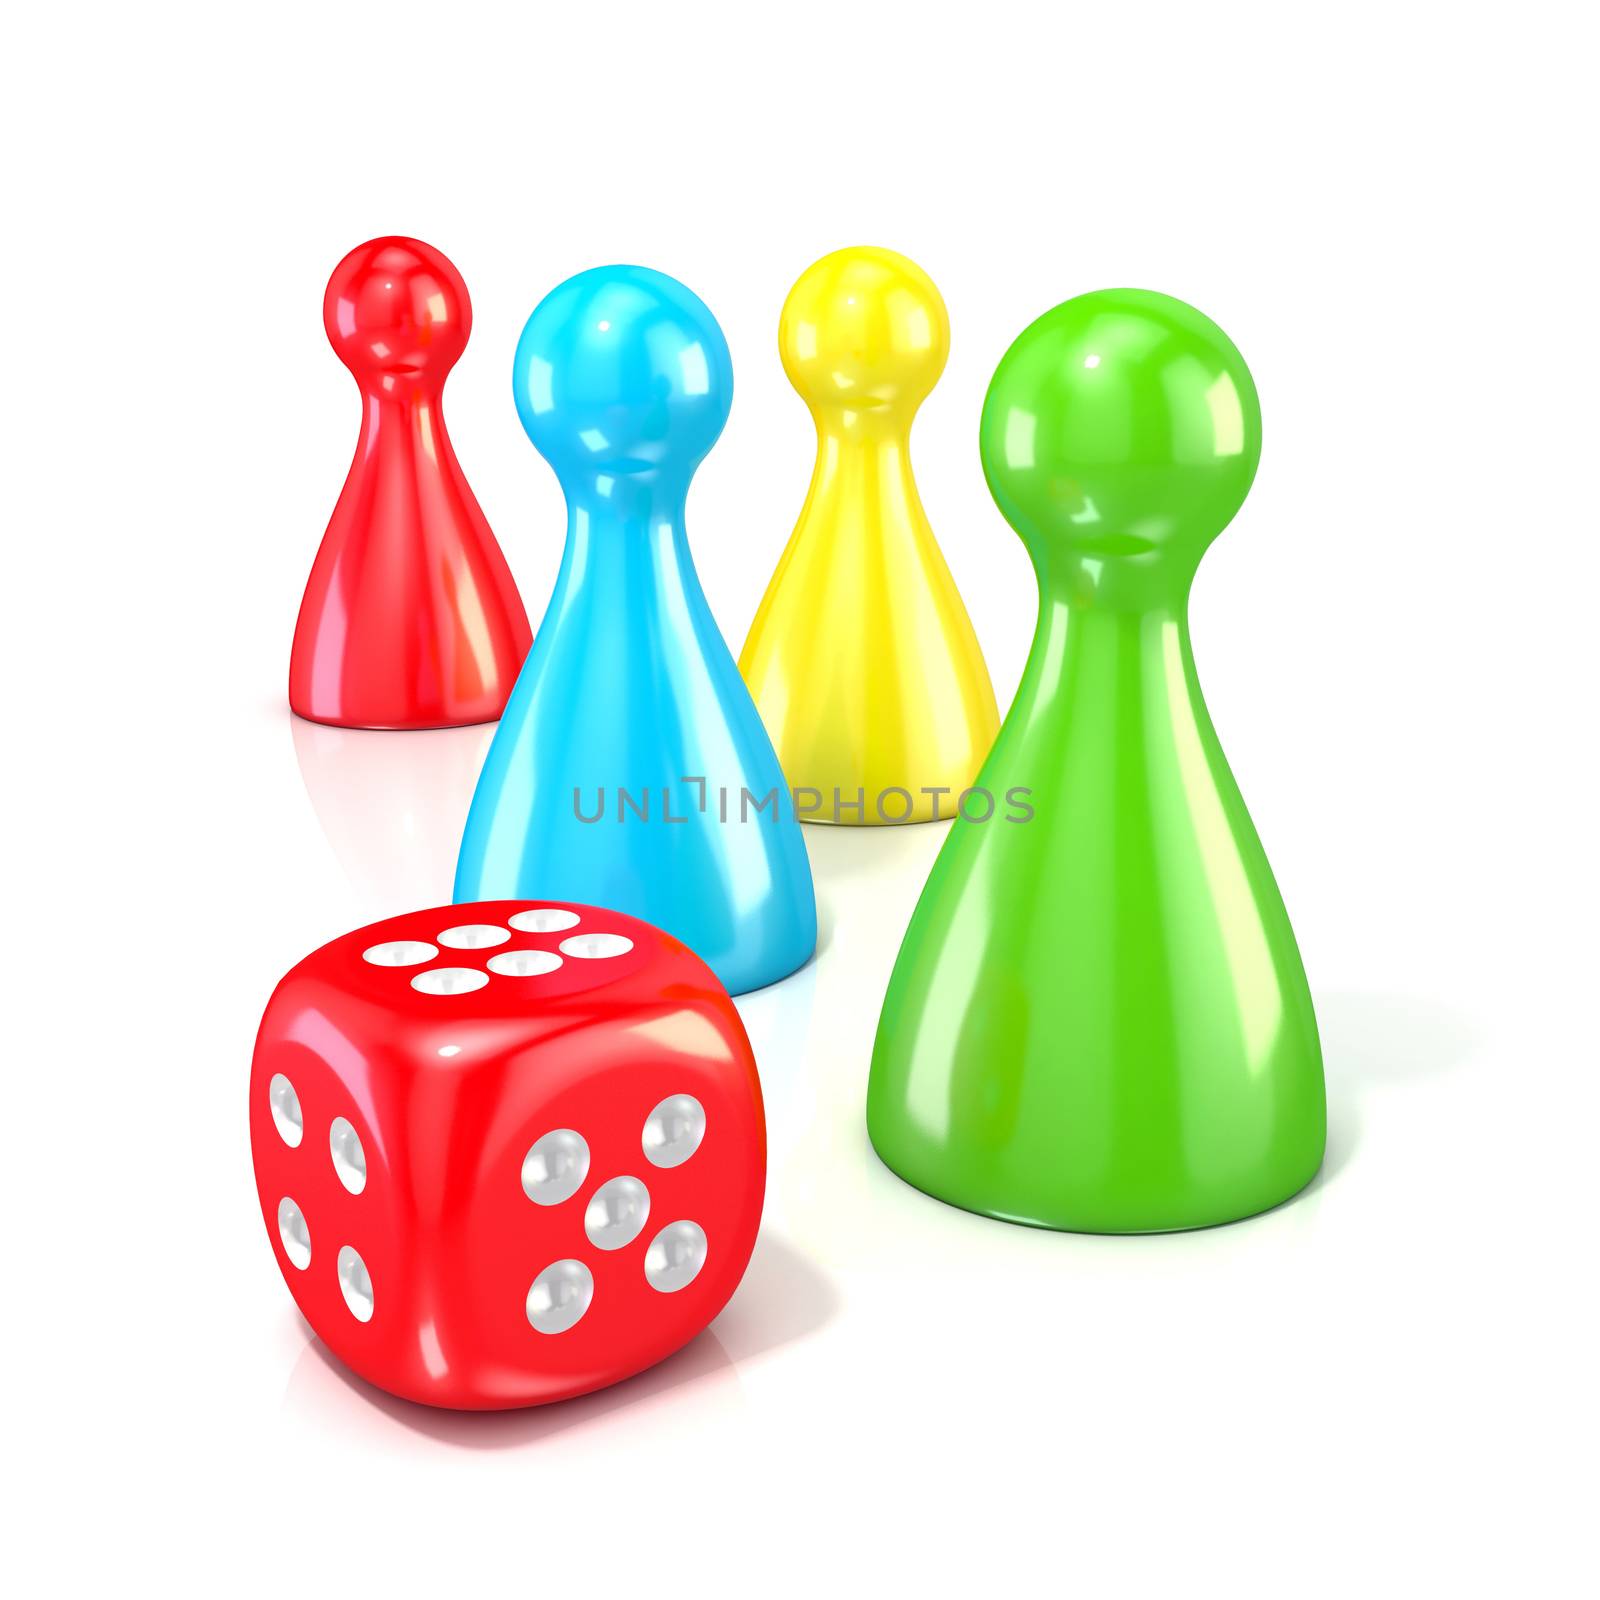 Board game figures with red dice. 3D by djmilic